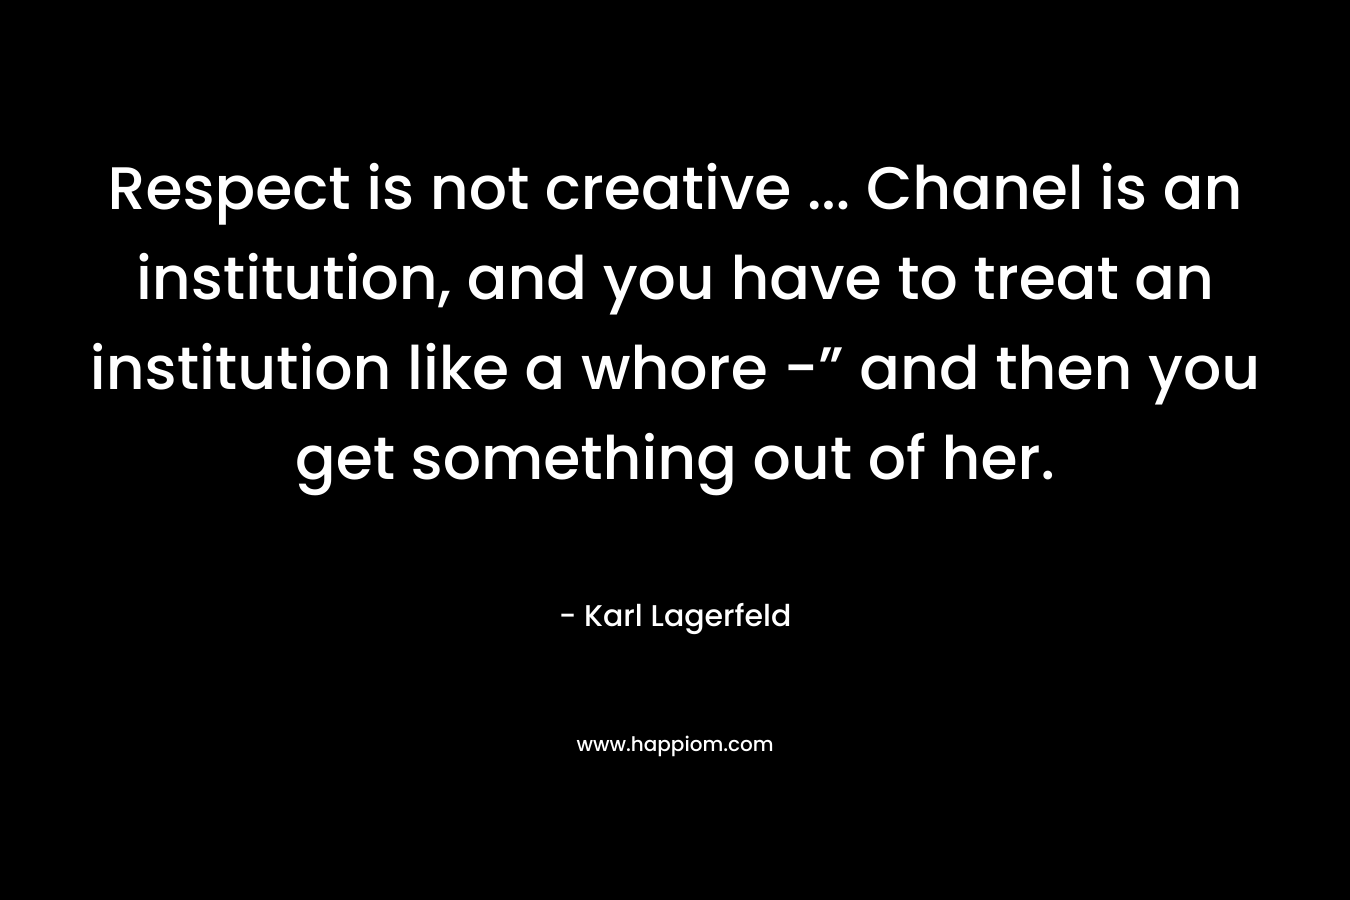 Respect is not creative … Chanel is an institution, and you have to treat an institution like a whore -” and then you get something out of her. – Karl Lagerfeld